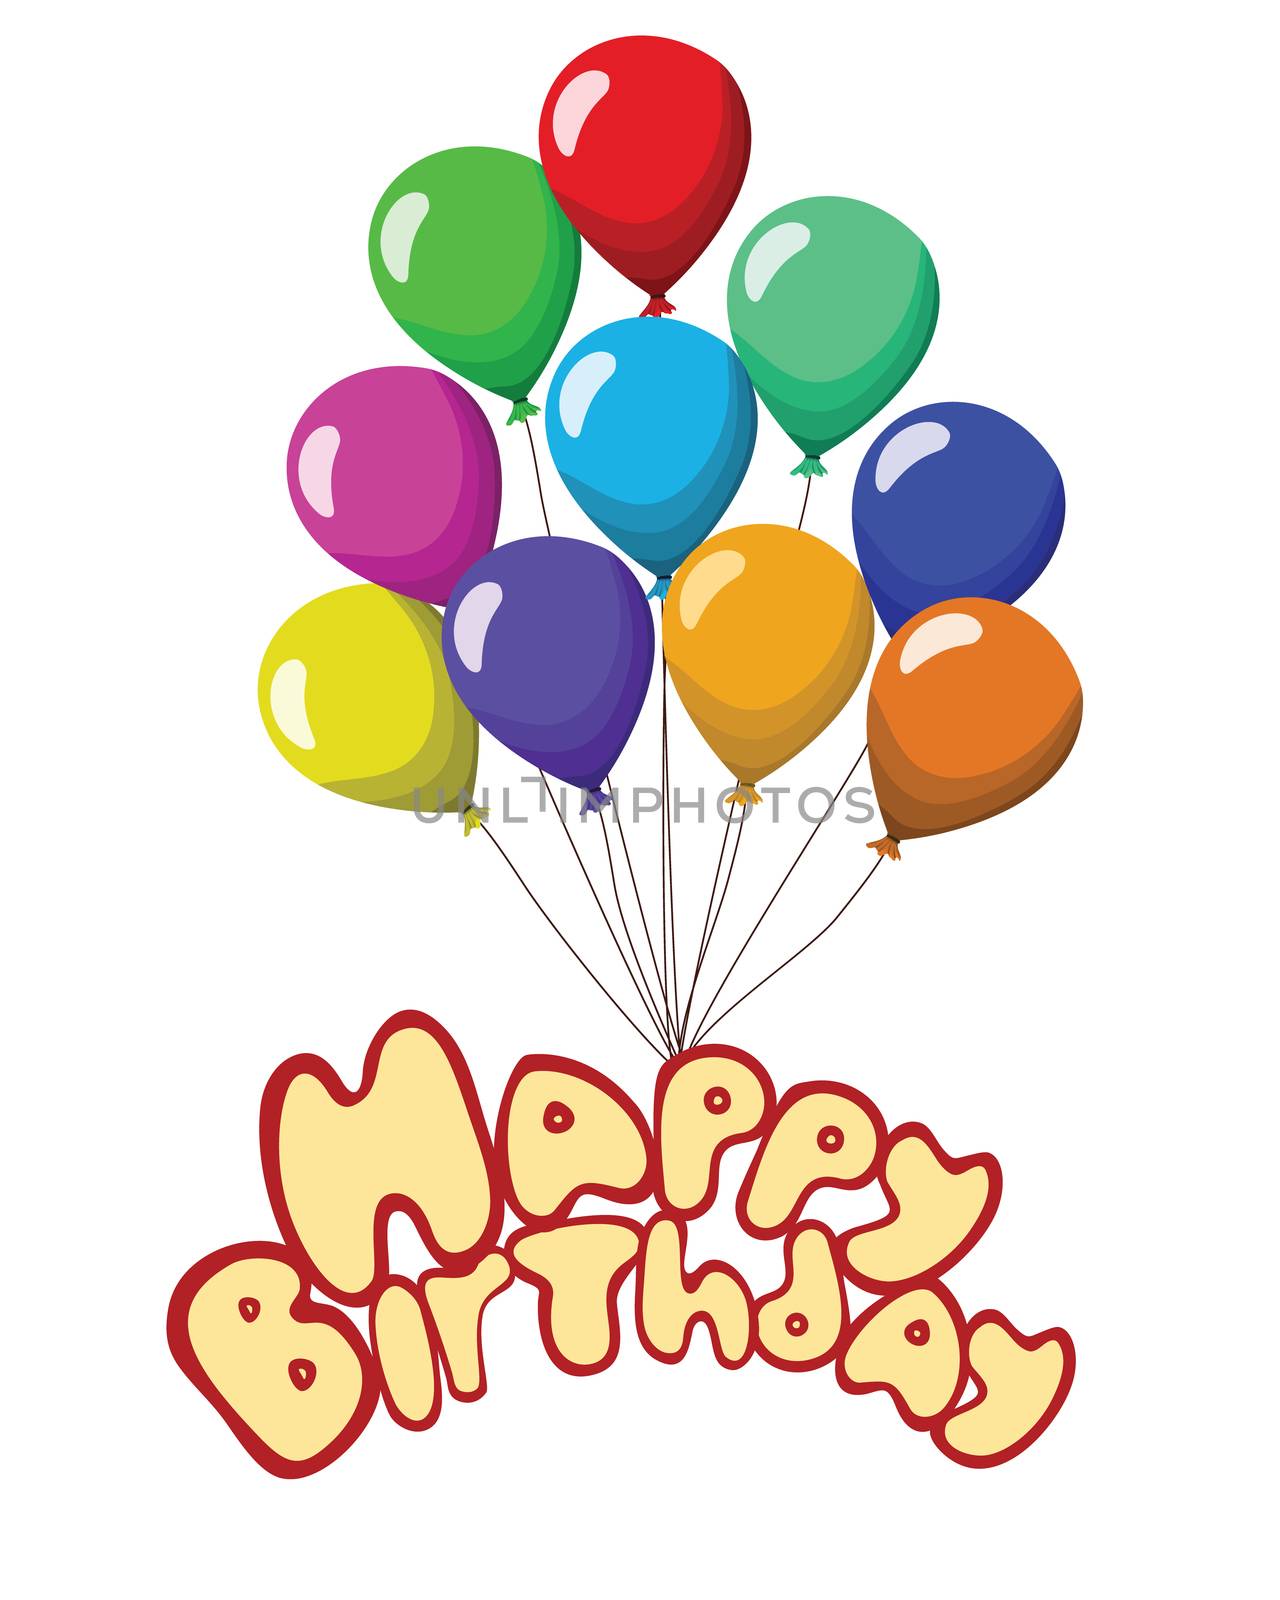 Happy birthday Text baloons ribbons isolated on white background by Lemon_workshop